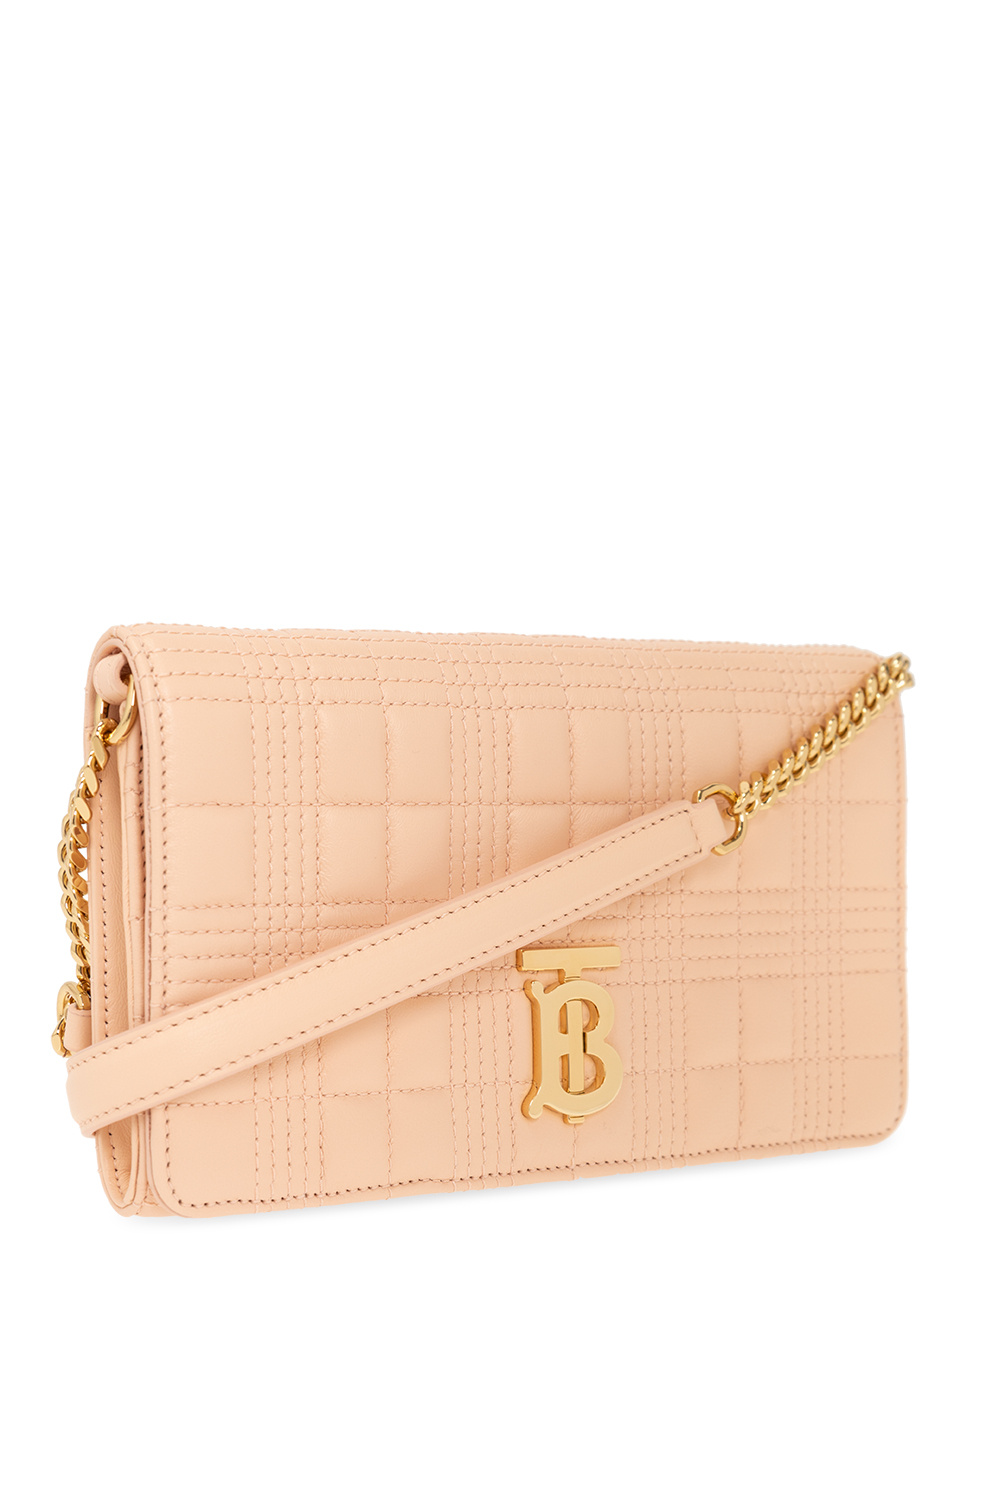 Burberry Wallet with shoulder strap, Women's Accessories